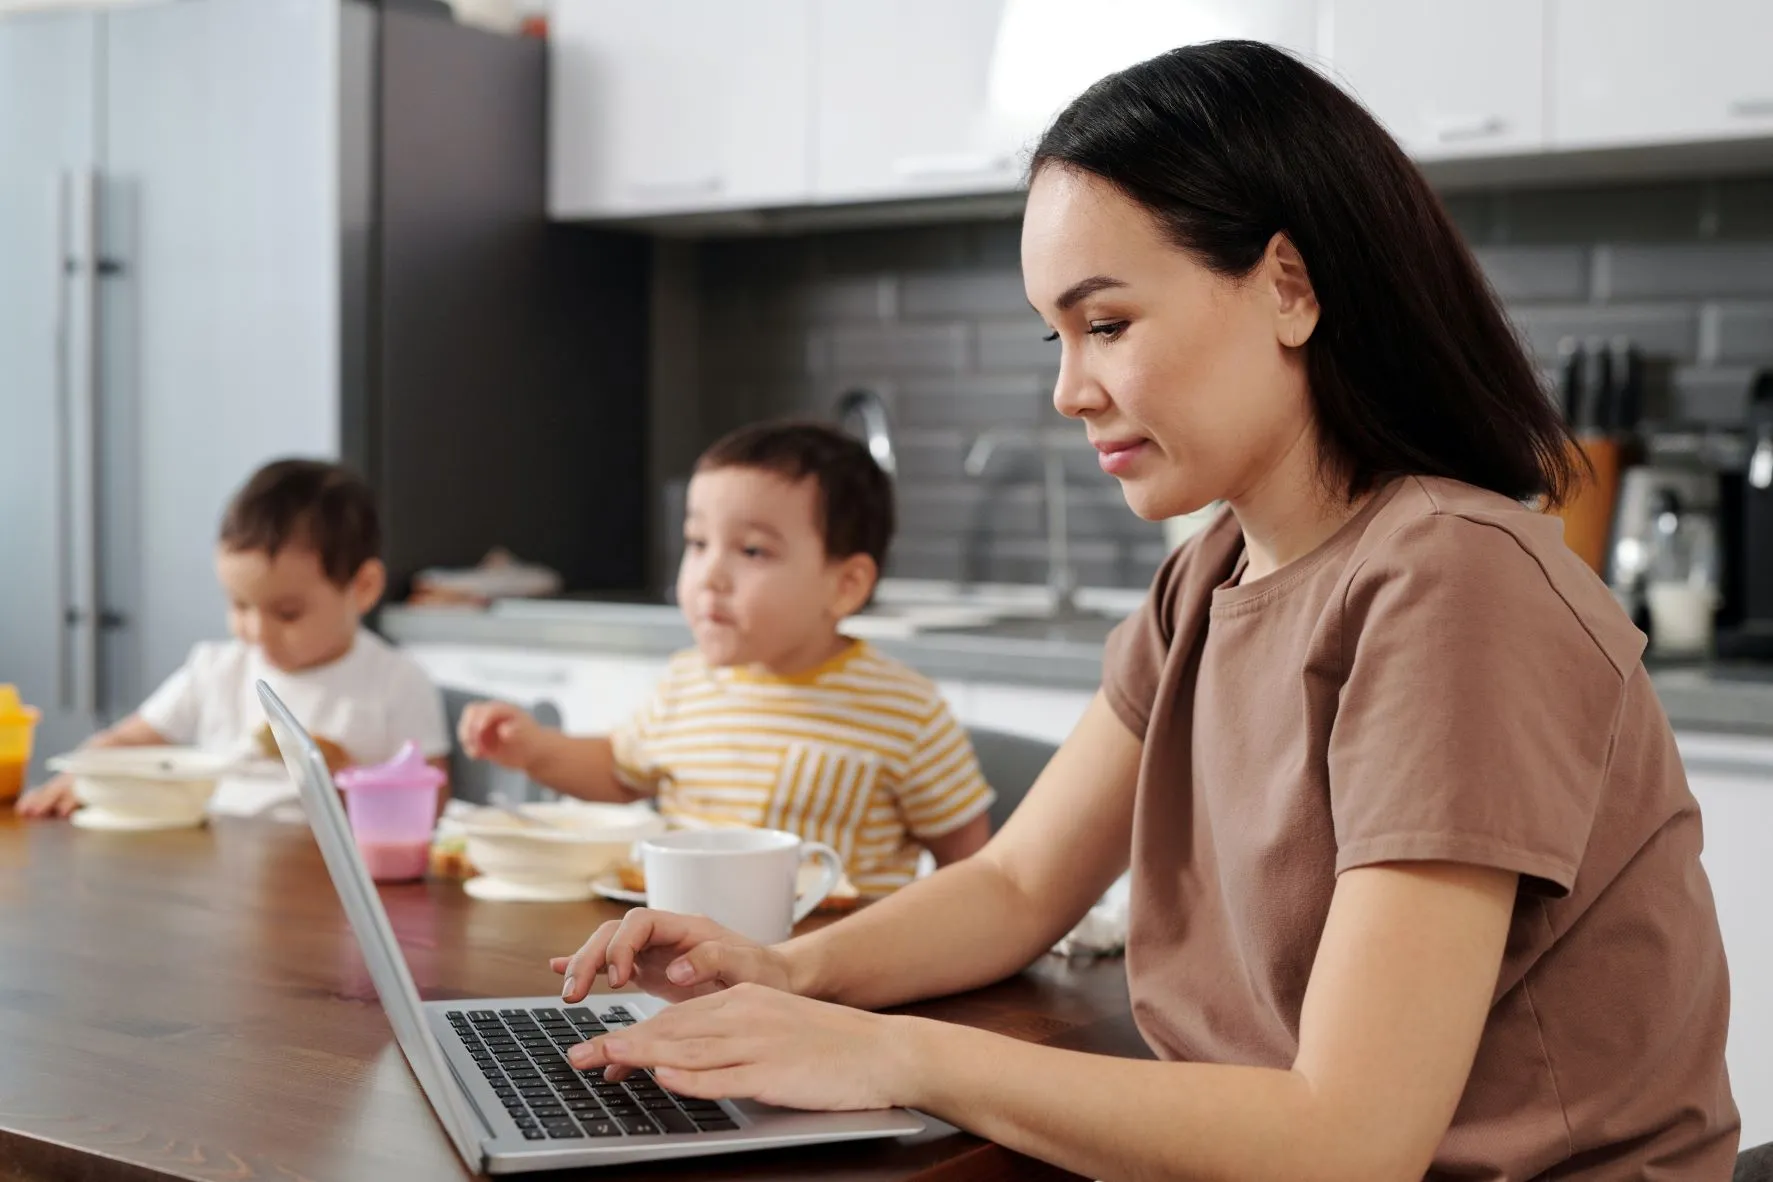  Workplace flexibility is depicted in an image showing a mother working on her laptop, in her family room/kitchen, with her two children in the background having food.